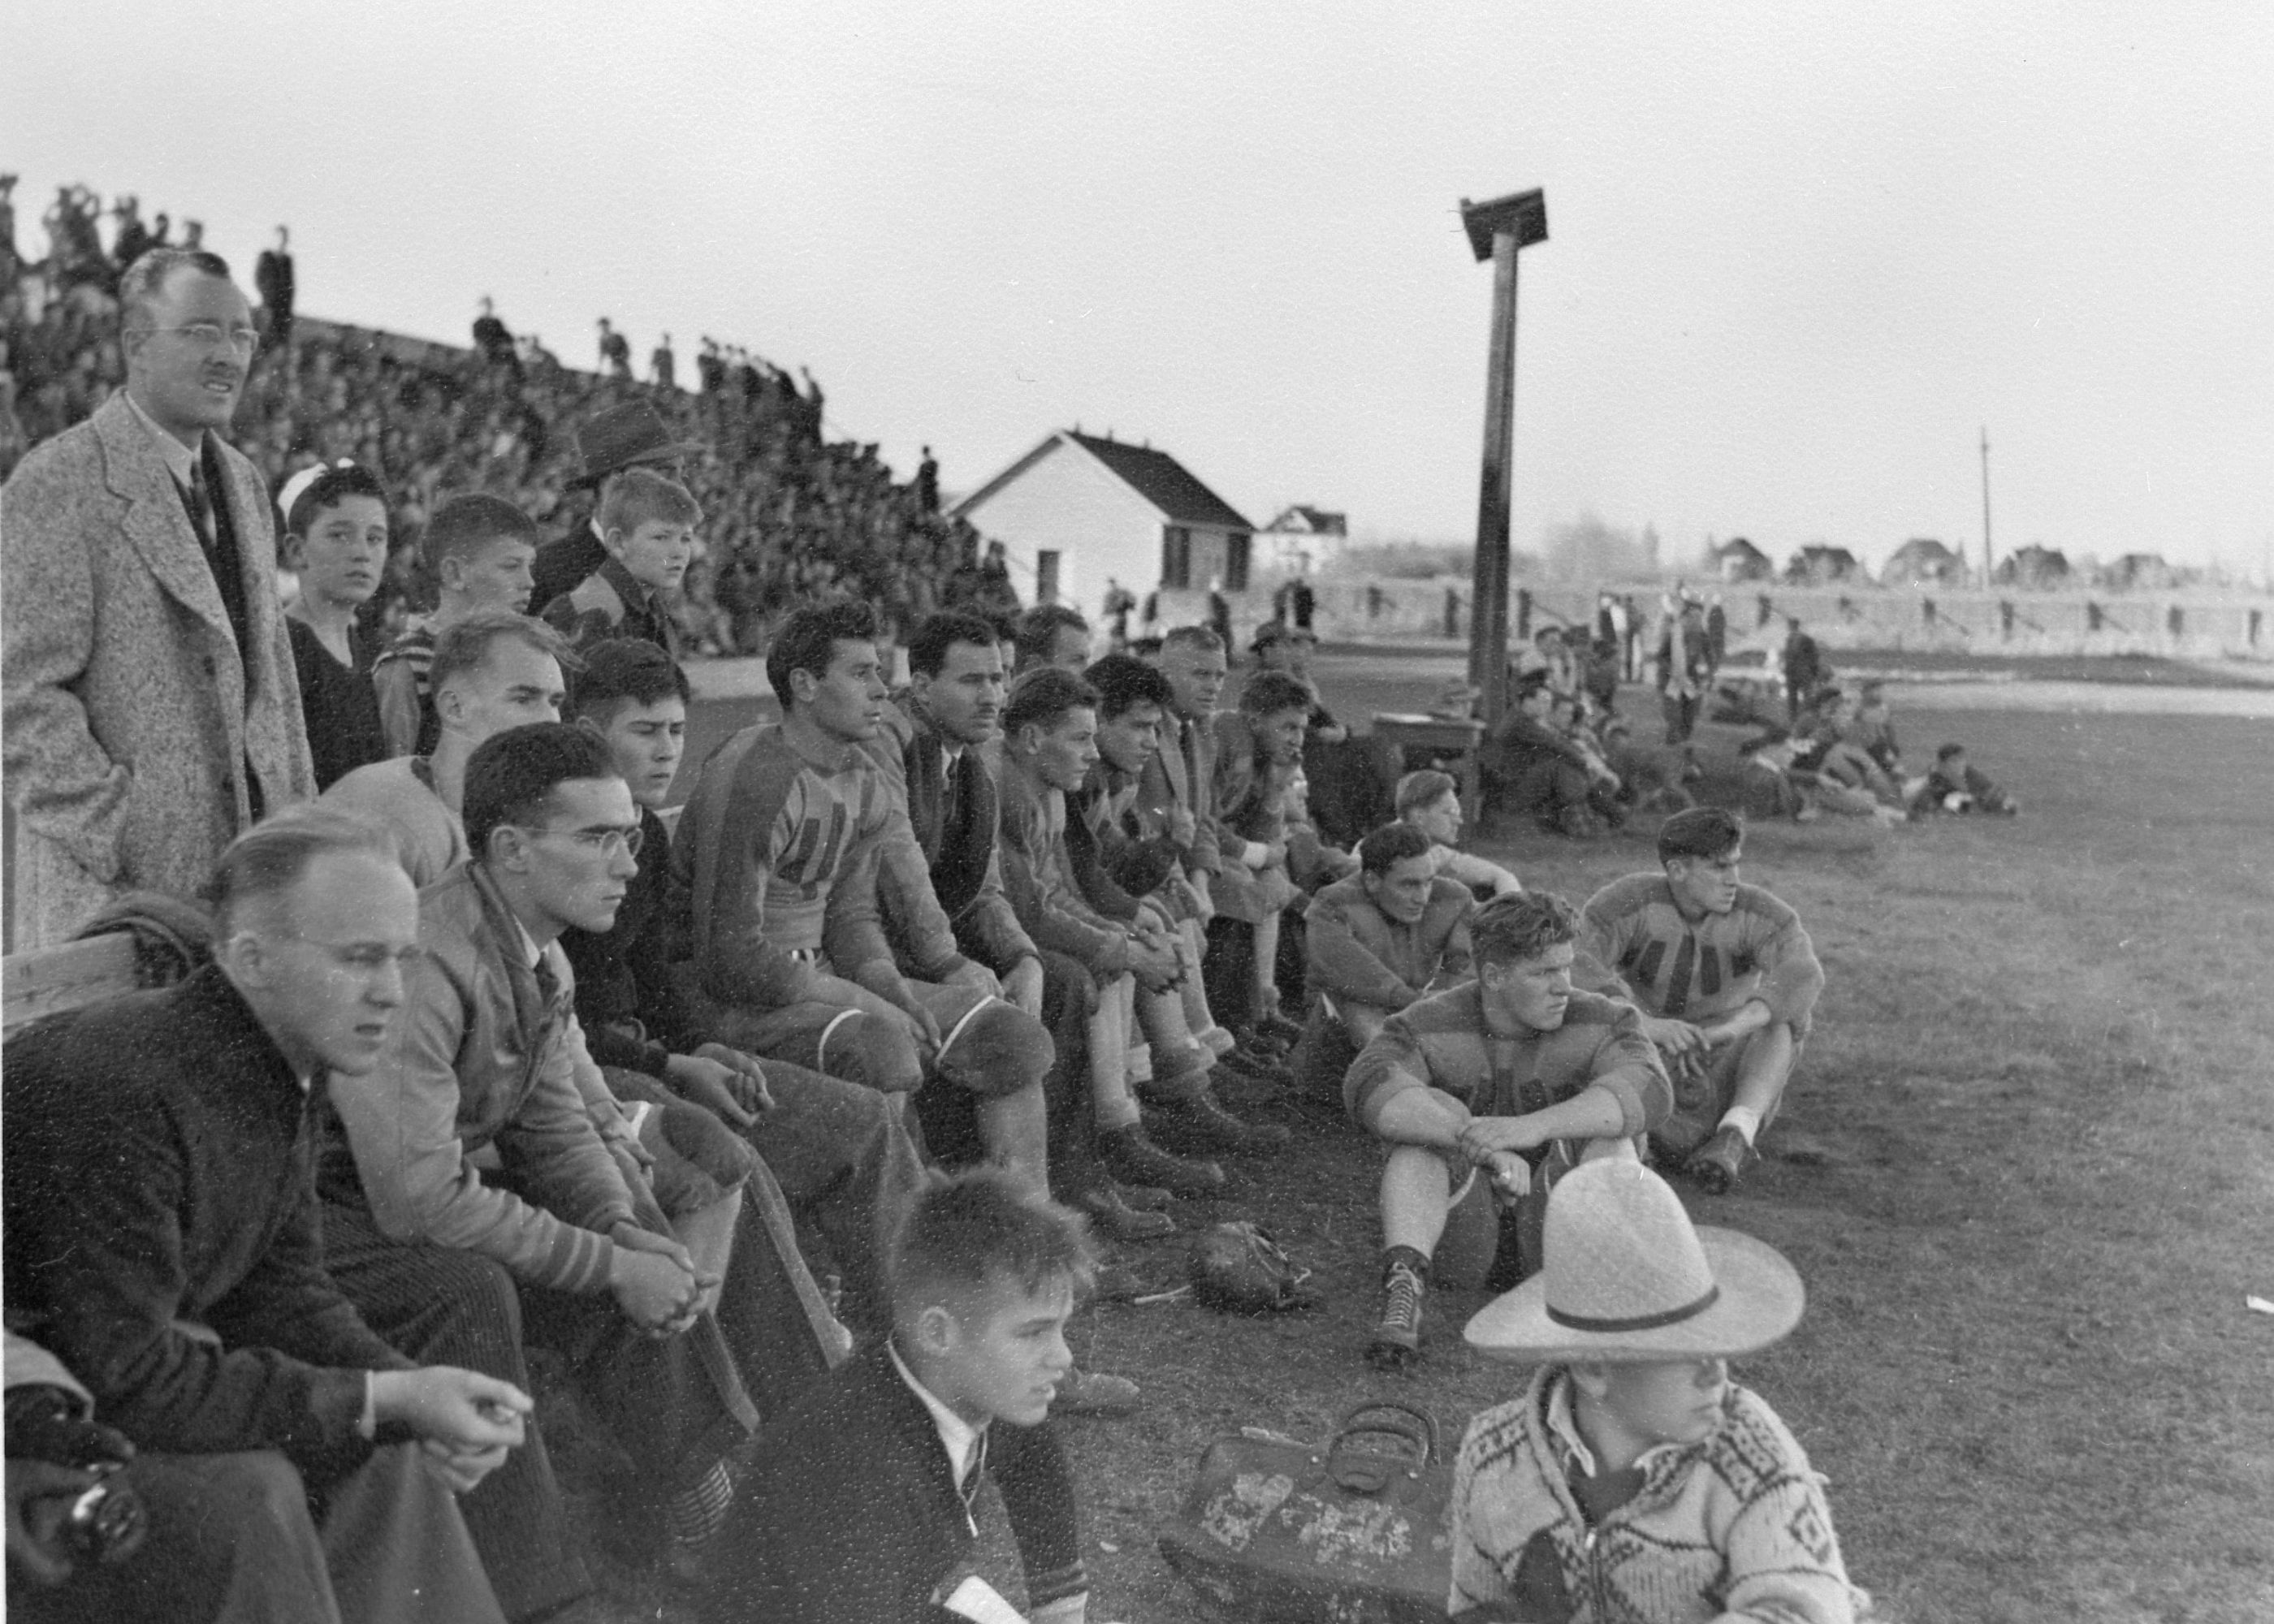 Crowd at rugby game (October 1940)